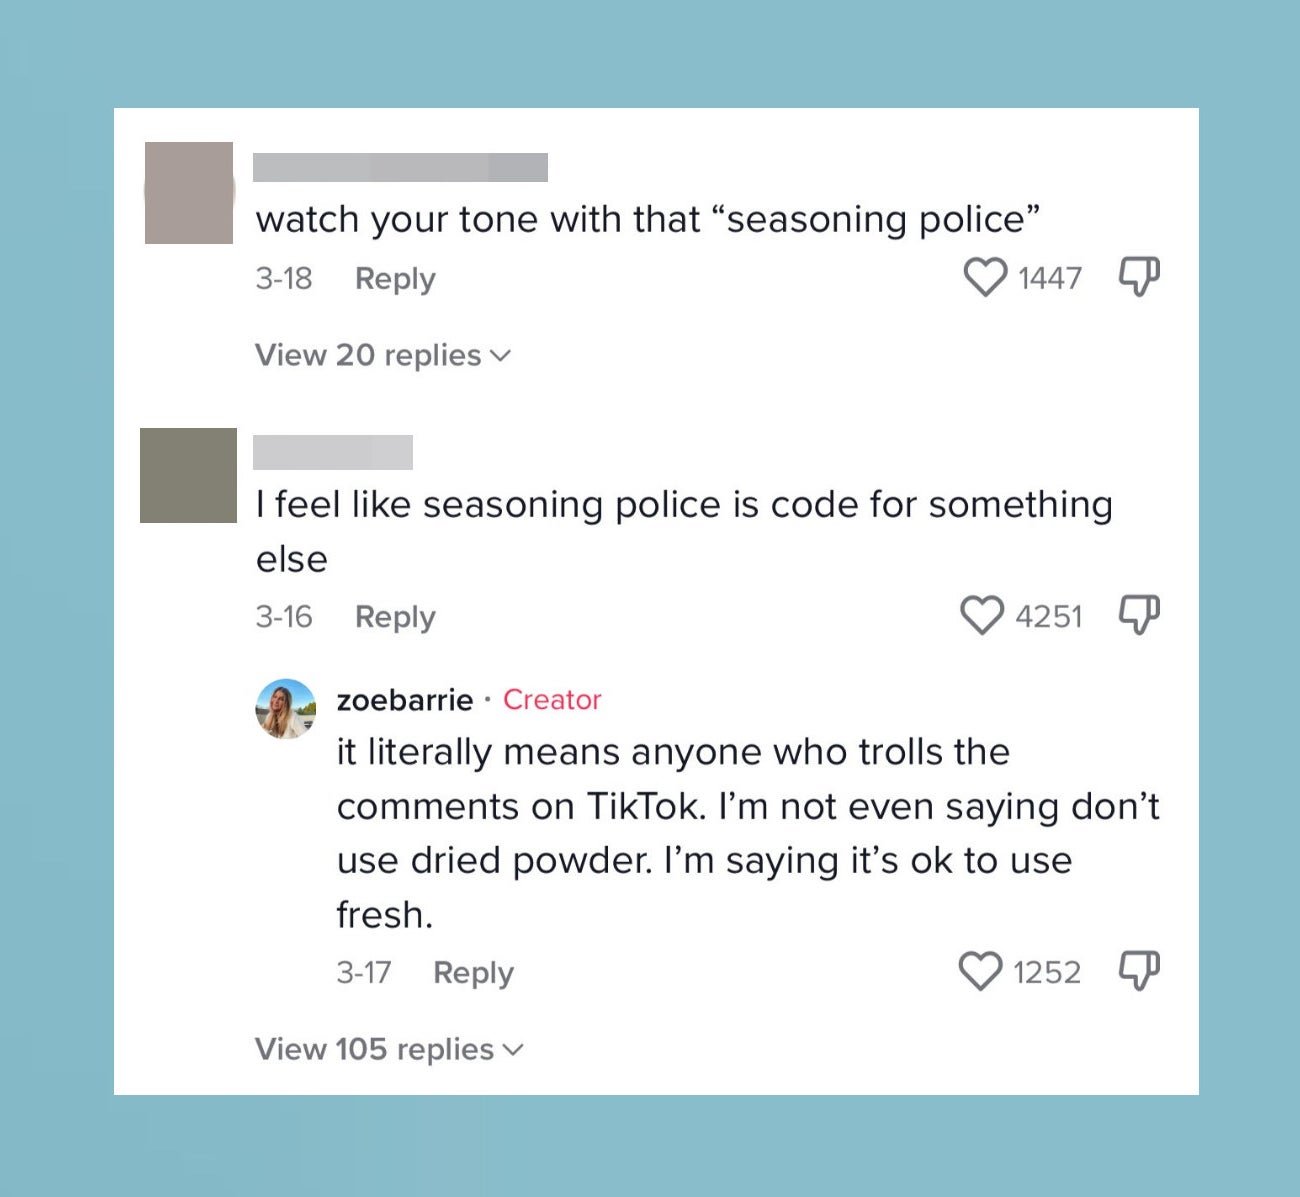 Negative comments, including &quot;Watch your tone with that &#x27;seasoning police&#x27;&quot;